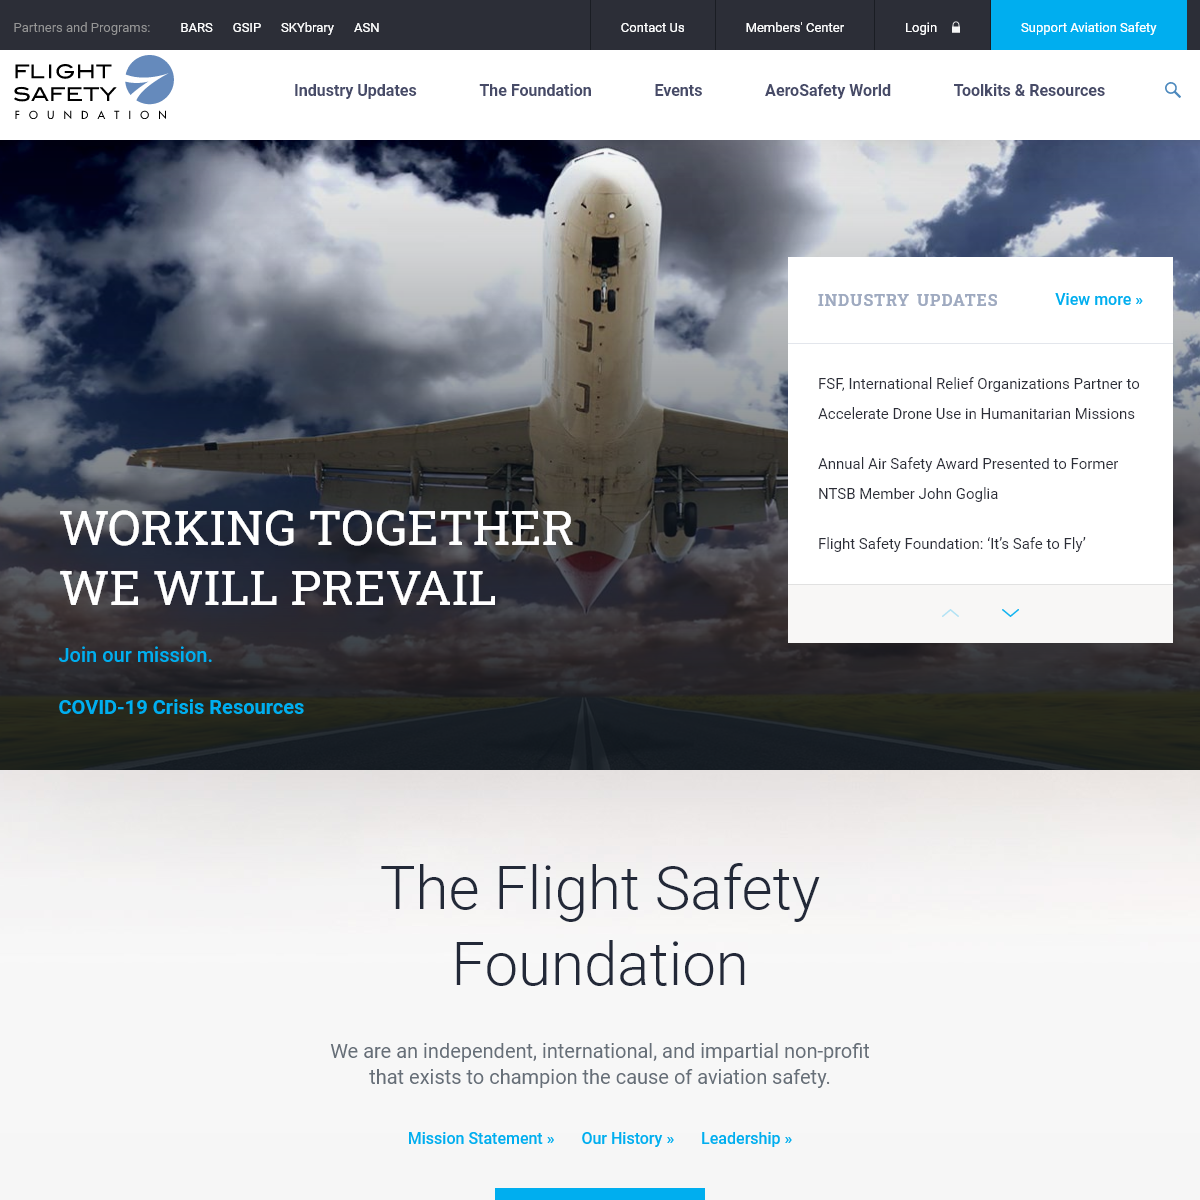 A complete backup of flightsafety.org